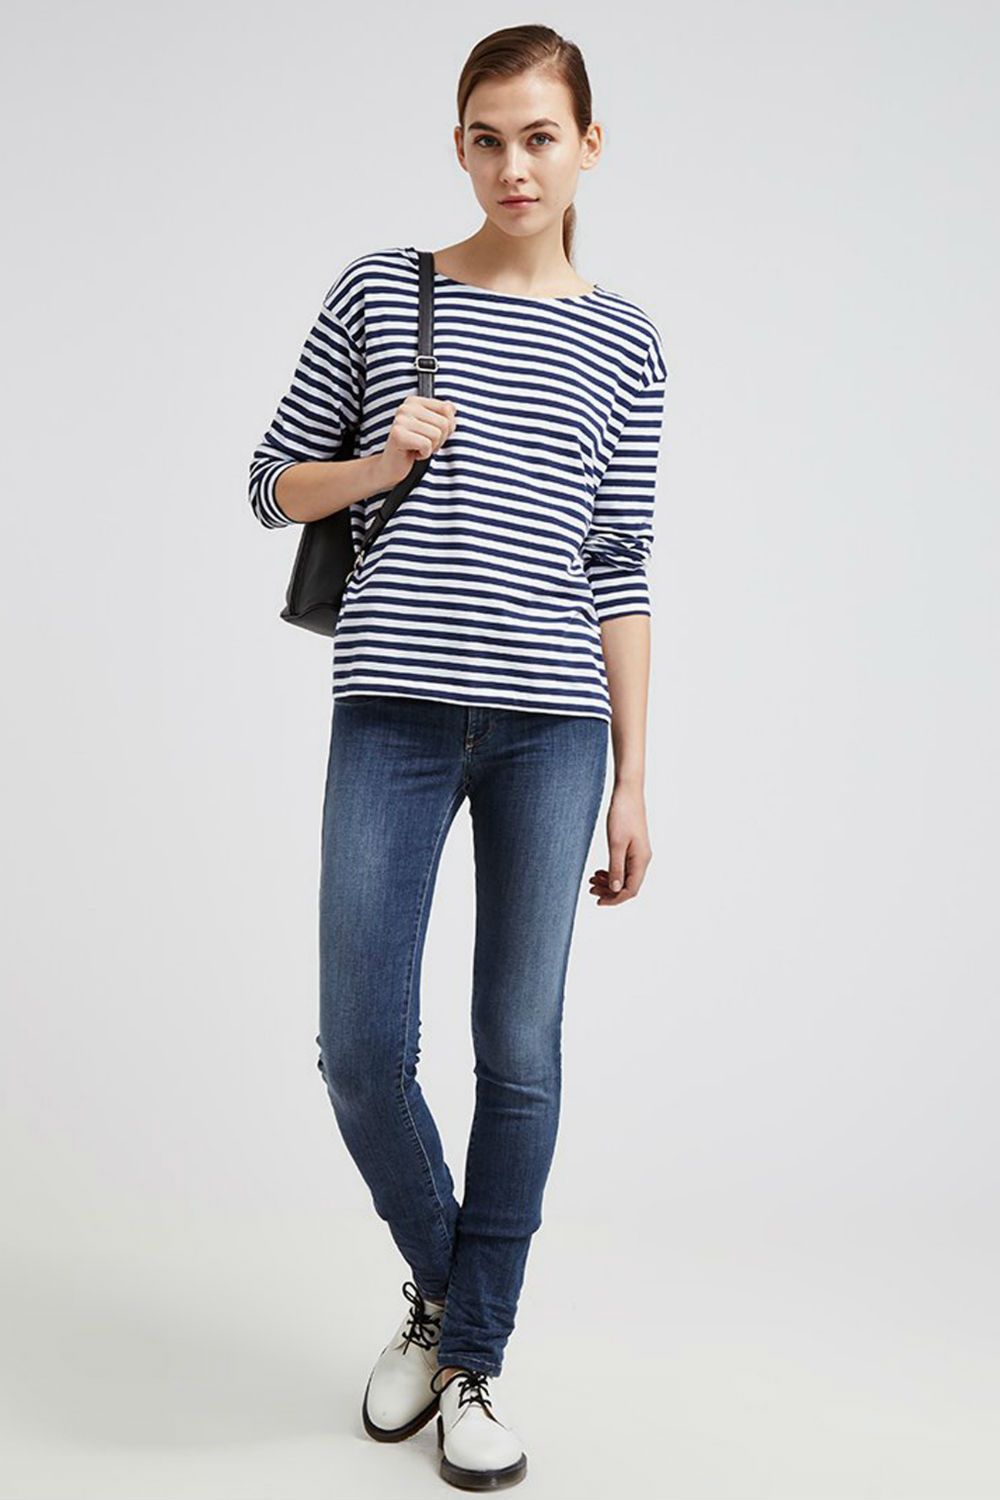 3 Ways To Rock A Breton Top For SS15 | Marie Claire UK